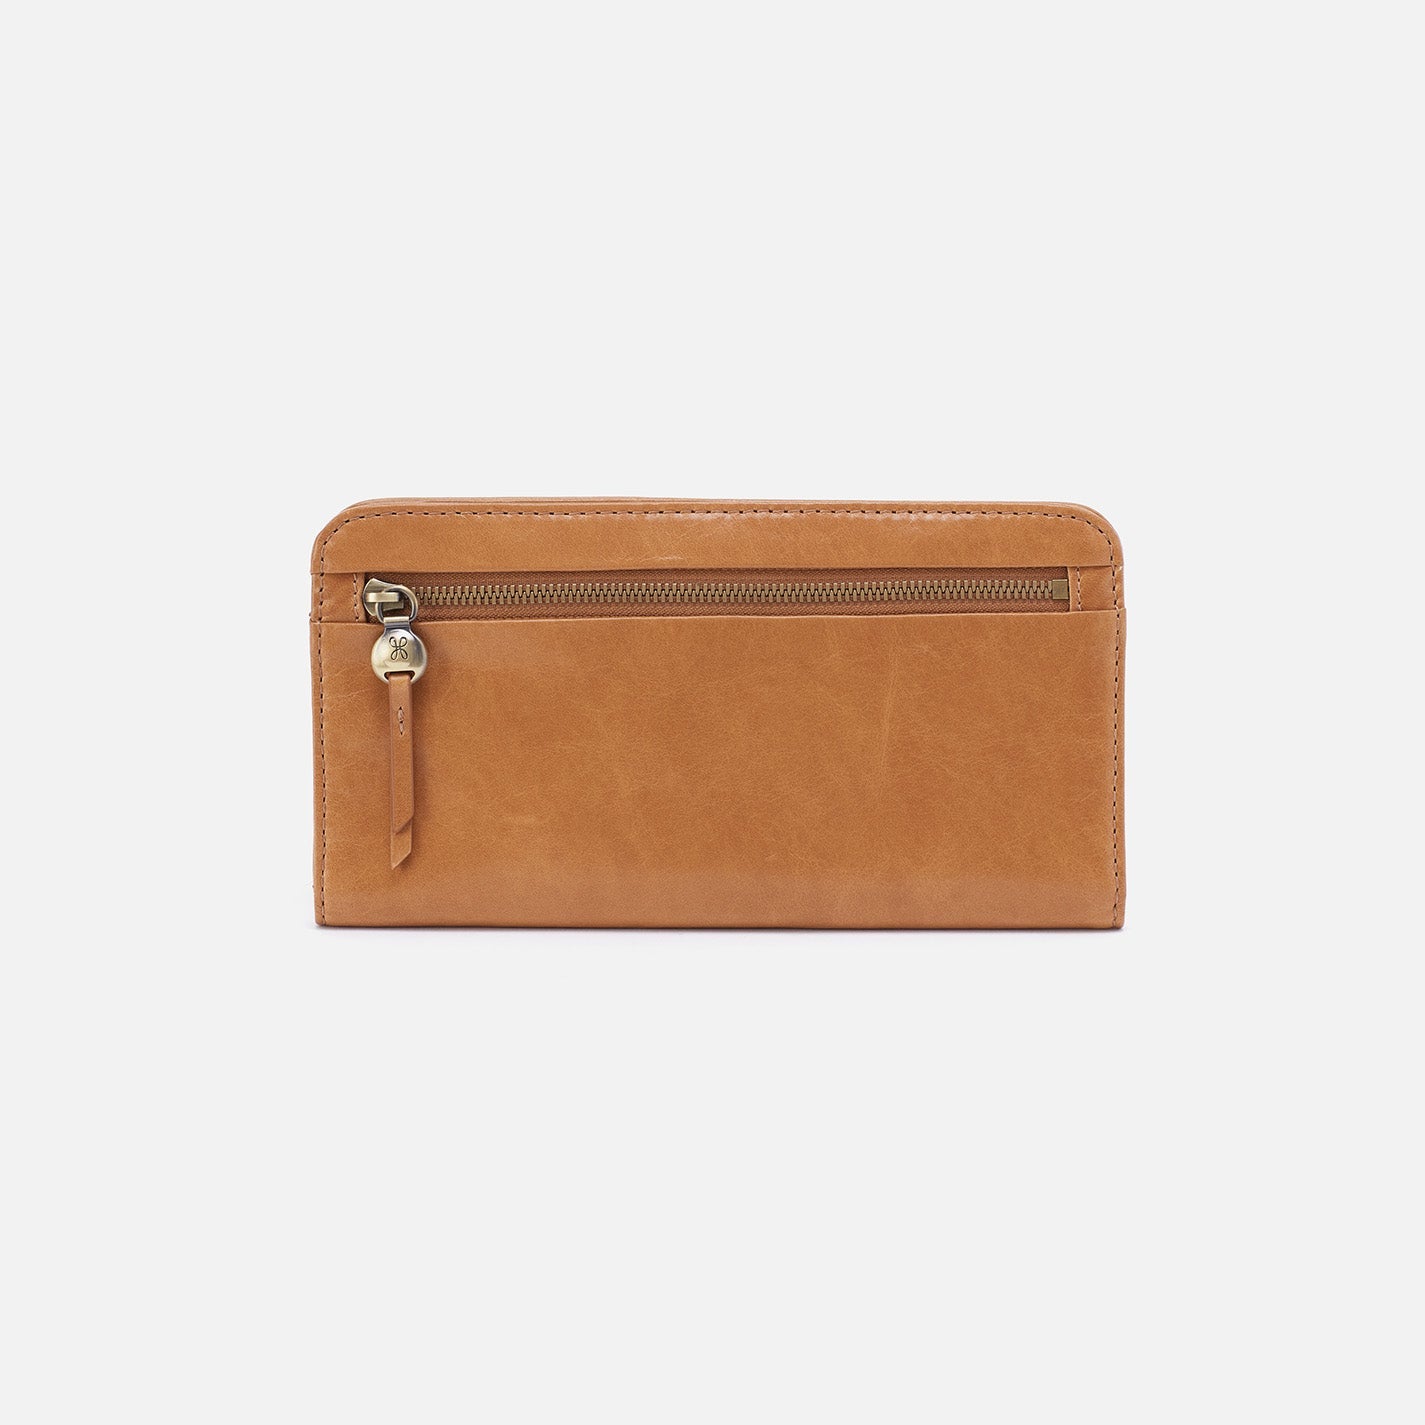 natural angle wallet on a white background.